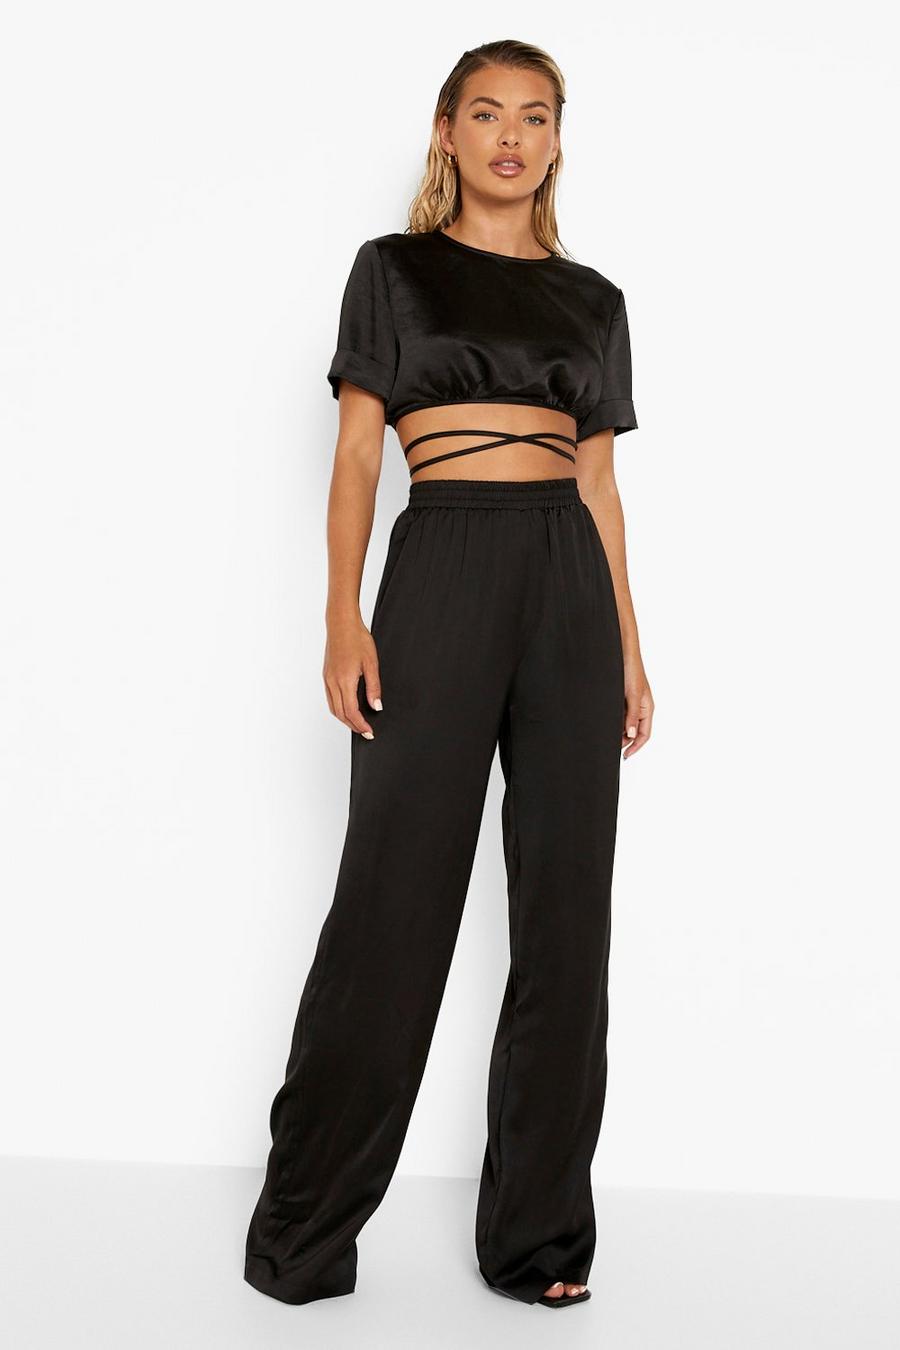 Black Satin Luxe Wide Leg Track Pants image number 1